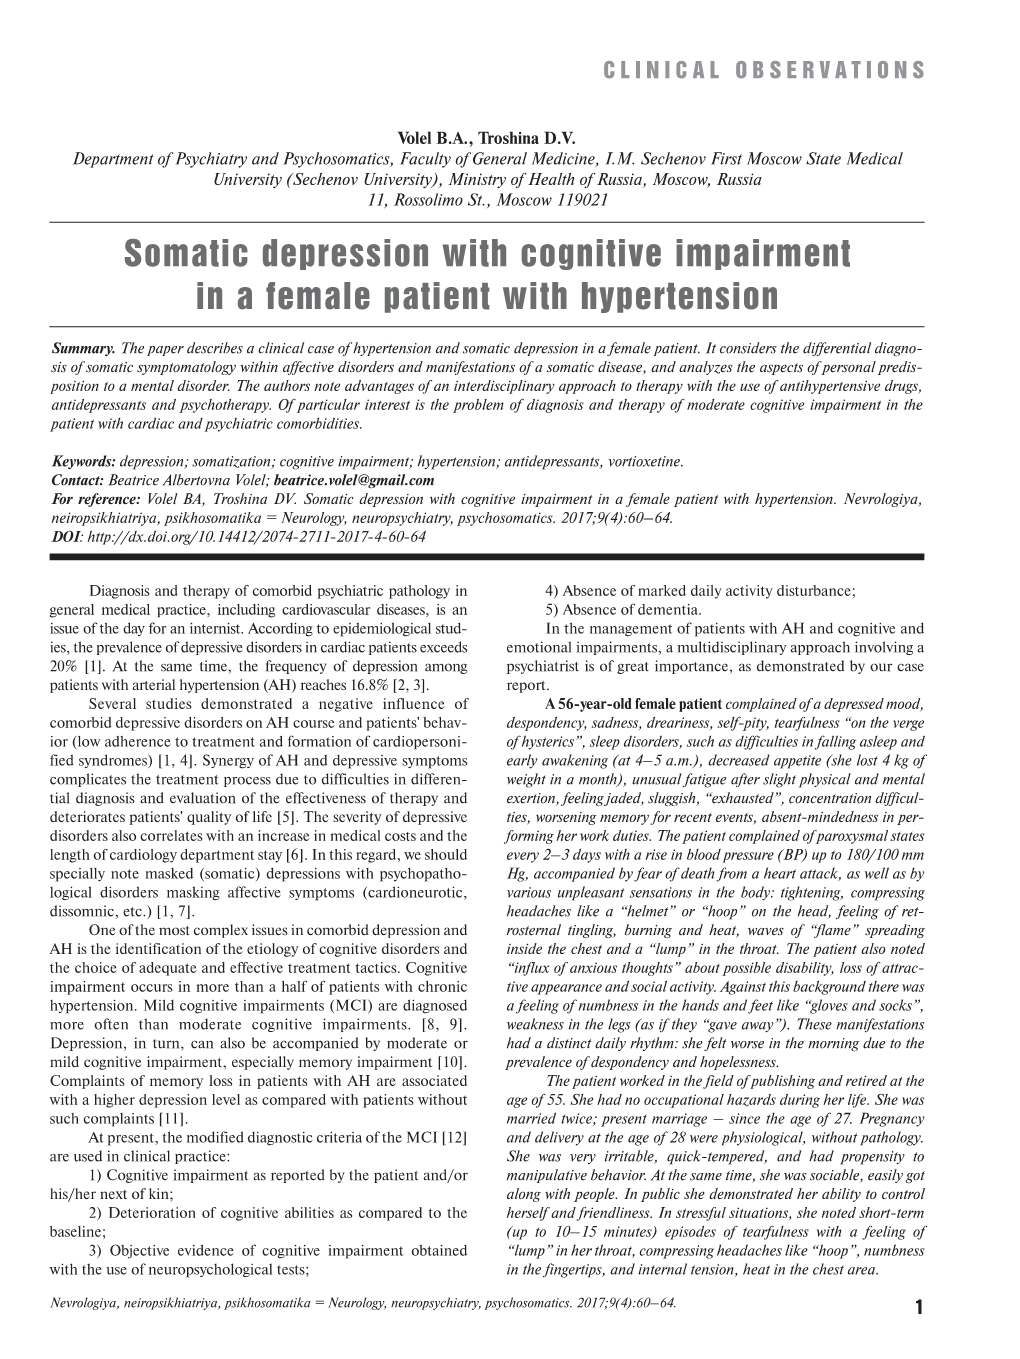 Somatic Depression with Cognitive Impairment in a Female Patient with Hypertension